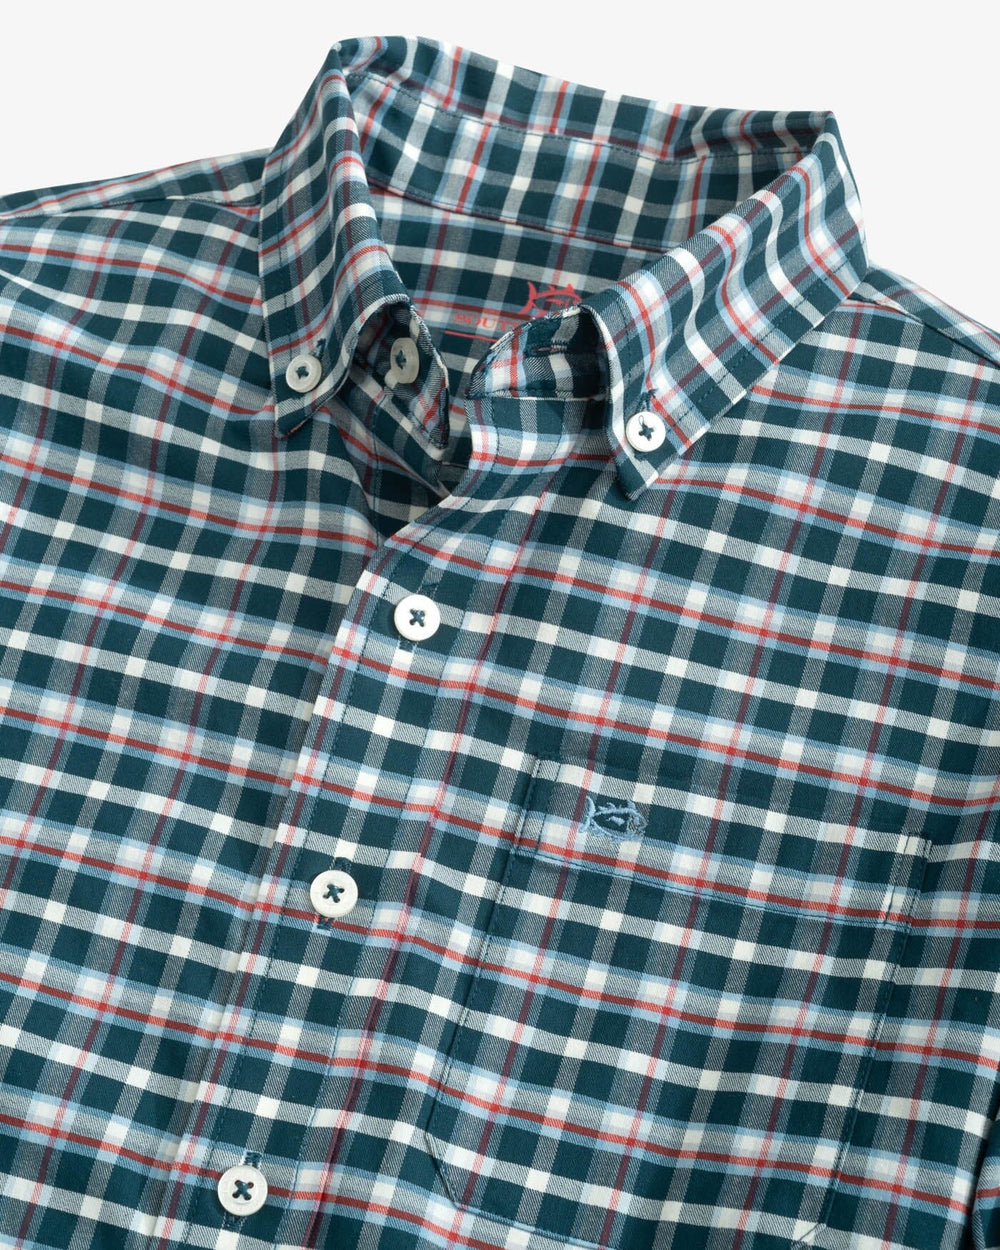 The detail view of the Southern Tide Youth Coastal Passage Bowden Plaid Long Sleeve Sportshirt by Southern Tide - Georgian Bay Green